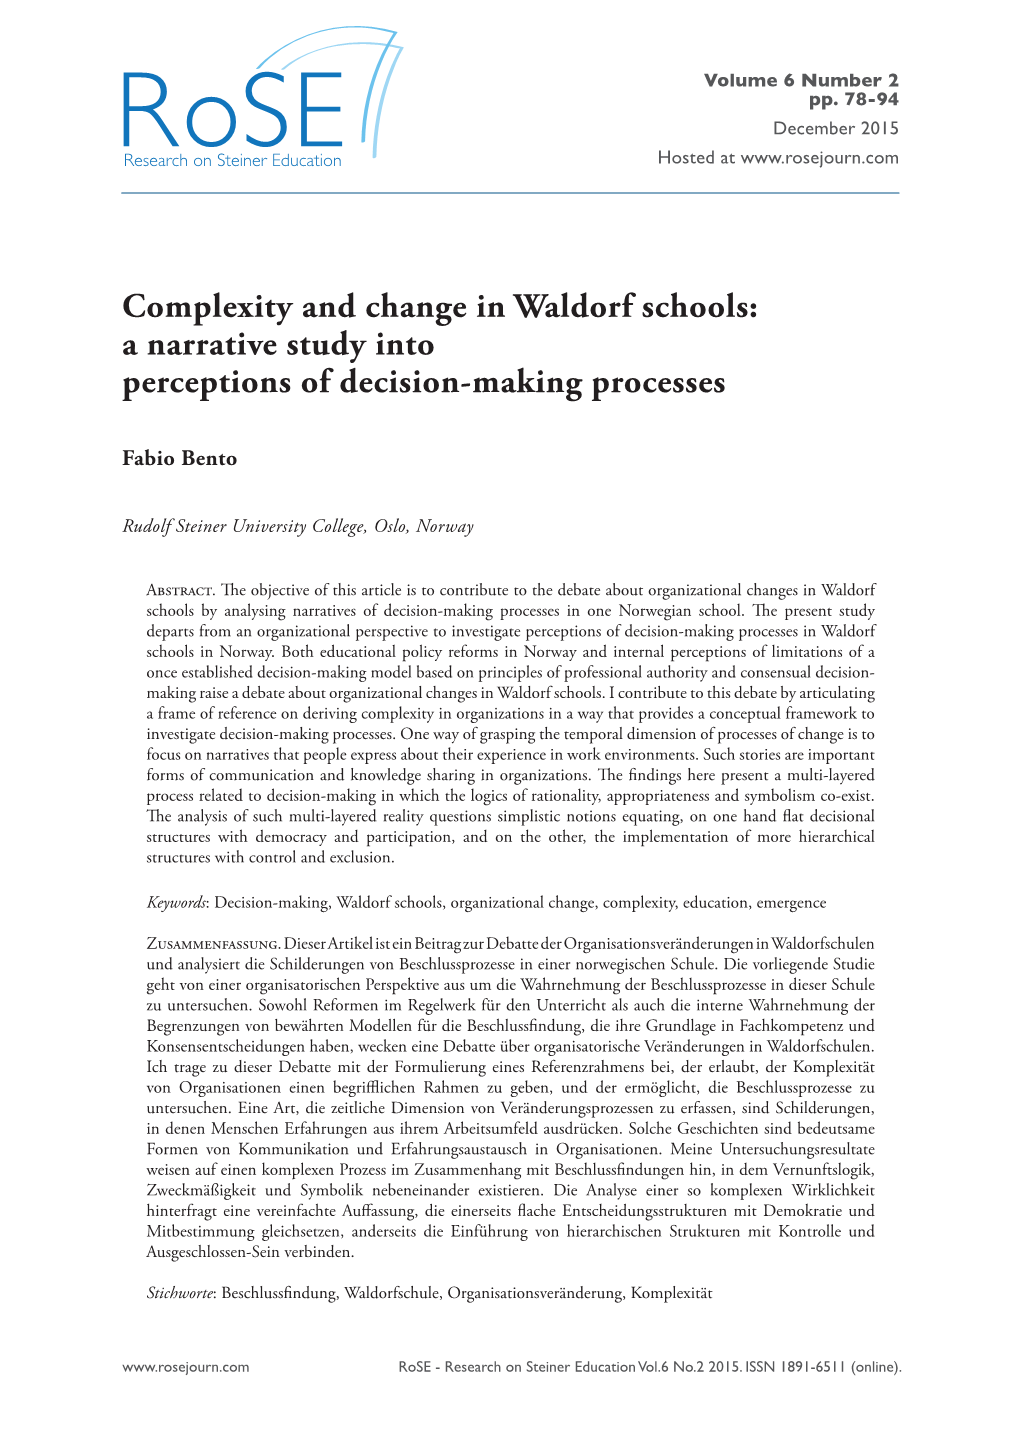 Complexity and Change in Waldorf Schools: a Narrative Study Into Perceptions of Decision-Making Processes